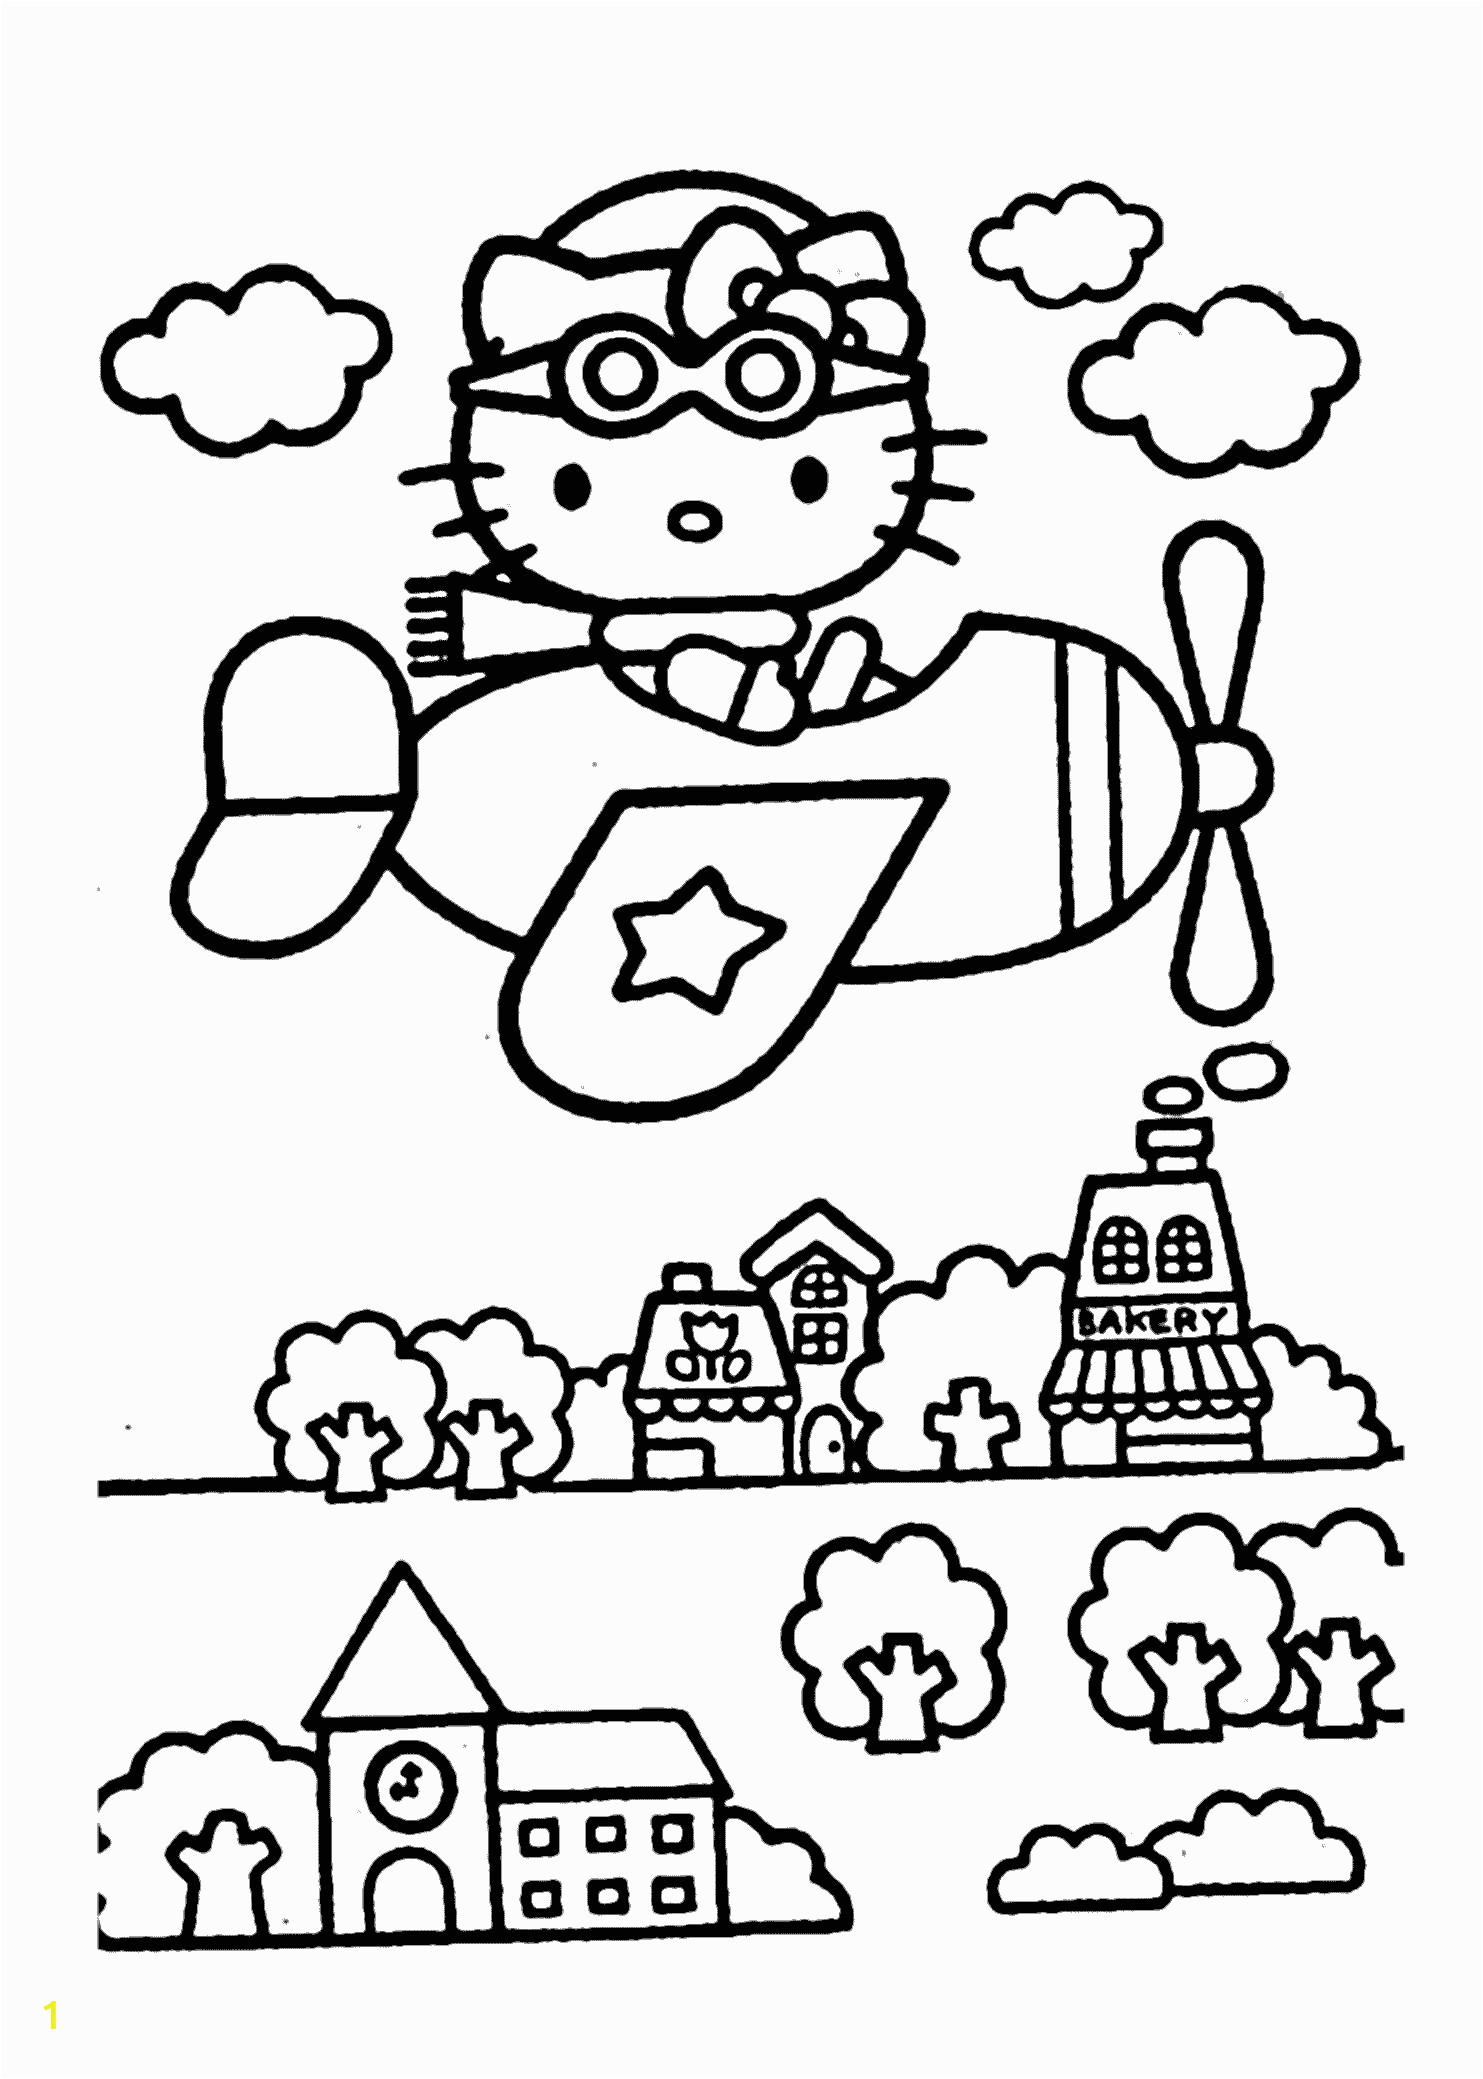 Hello Kitty Coloring Pages at the Beach Hello Kitty On Airplain – Coloring Pages for Kids with